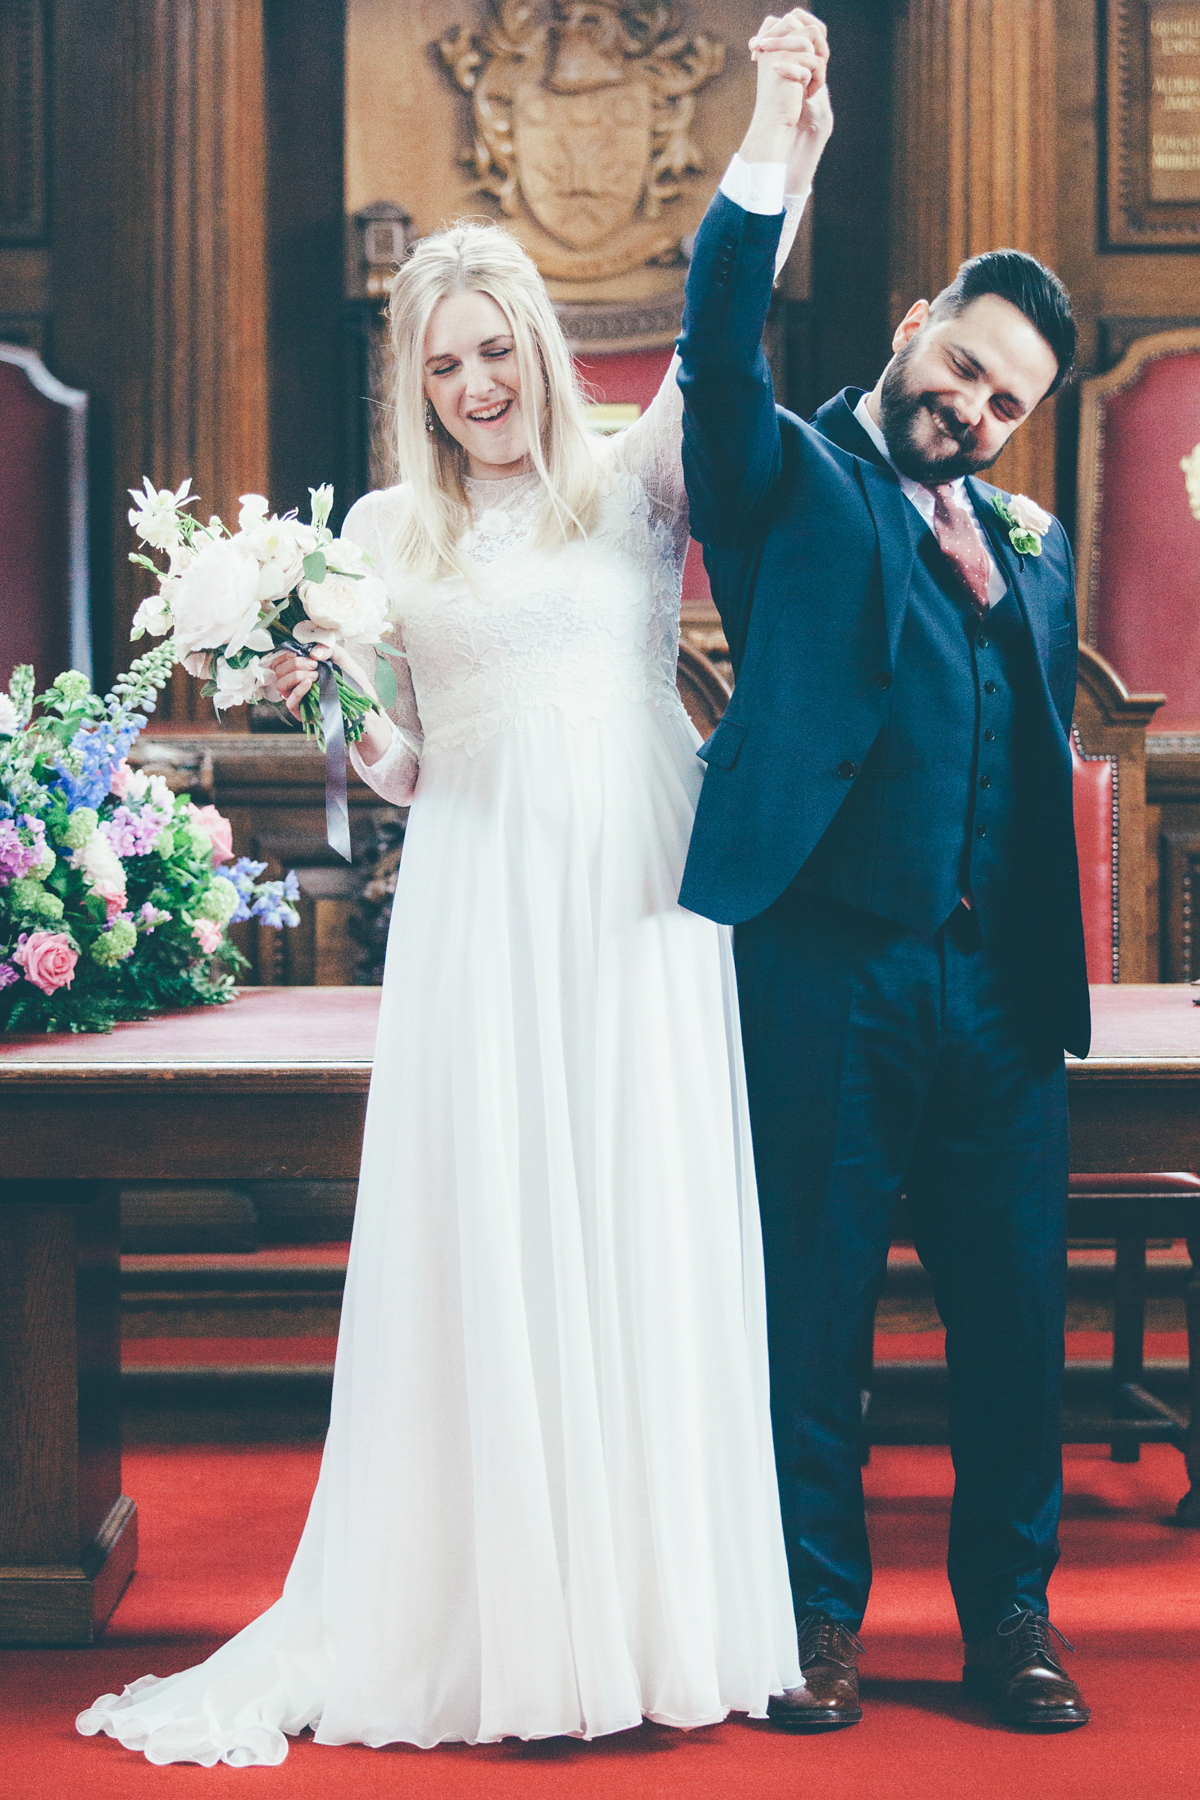 Ash wore a Jesus Peiro gown and winged shoes by Sophia Webster for her stripped back and fuss free wedding in London. Captured by September Pictures.